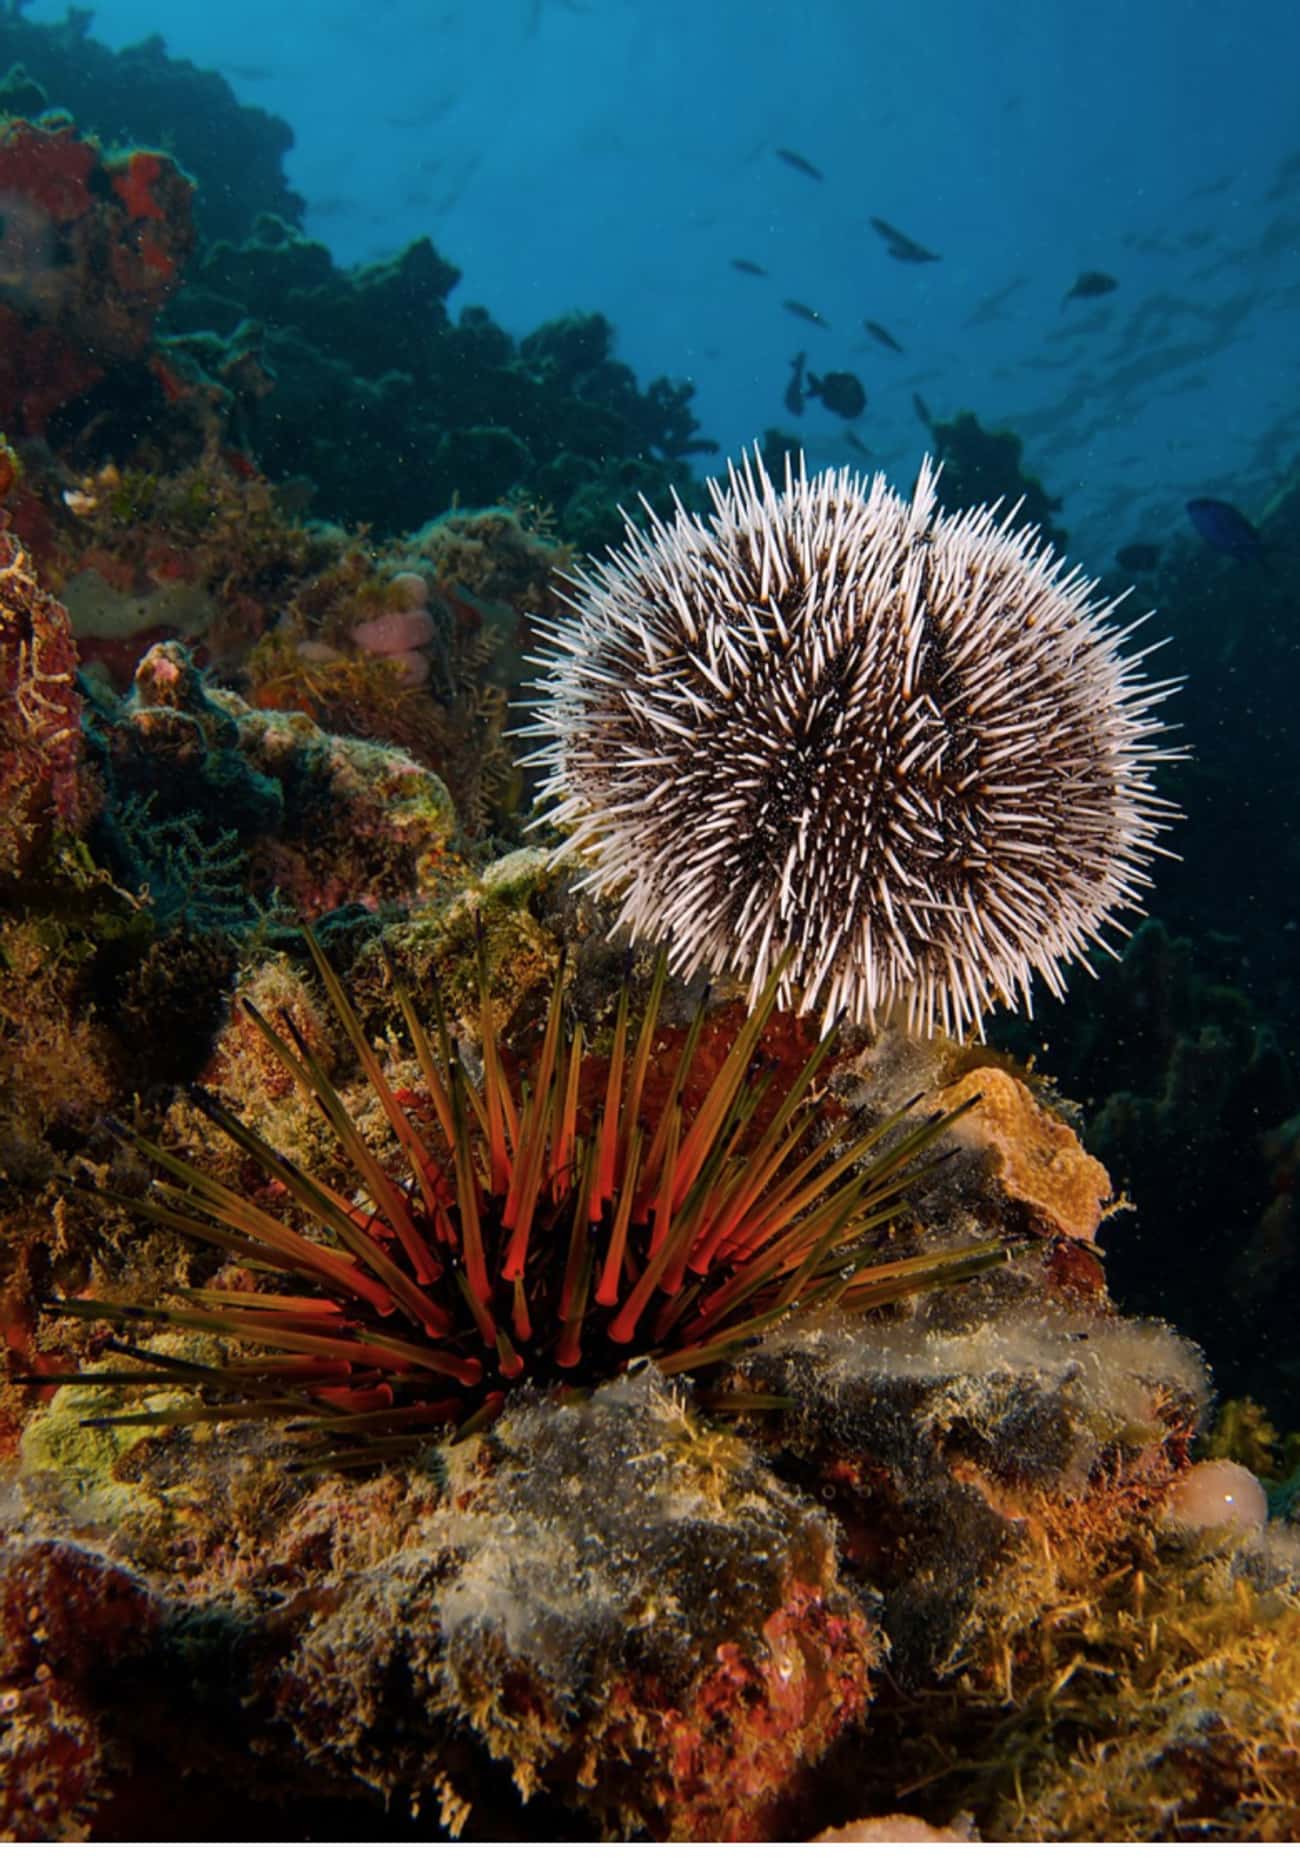 The First Cloned Animal Was Actually A Sea Urchin - Cloned In 1885!